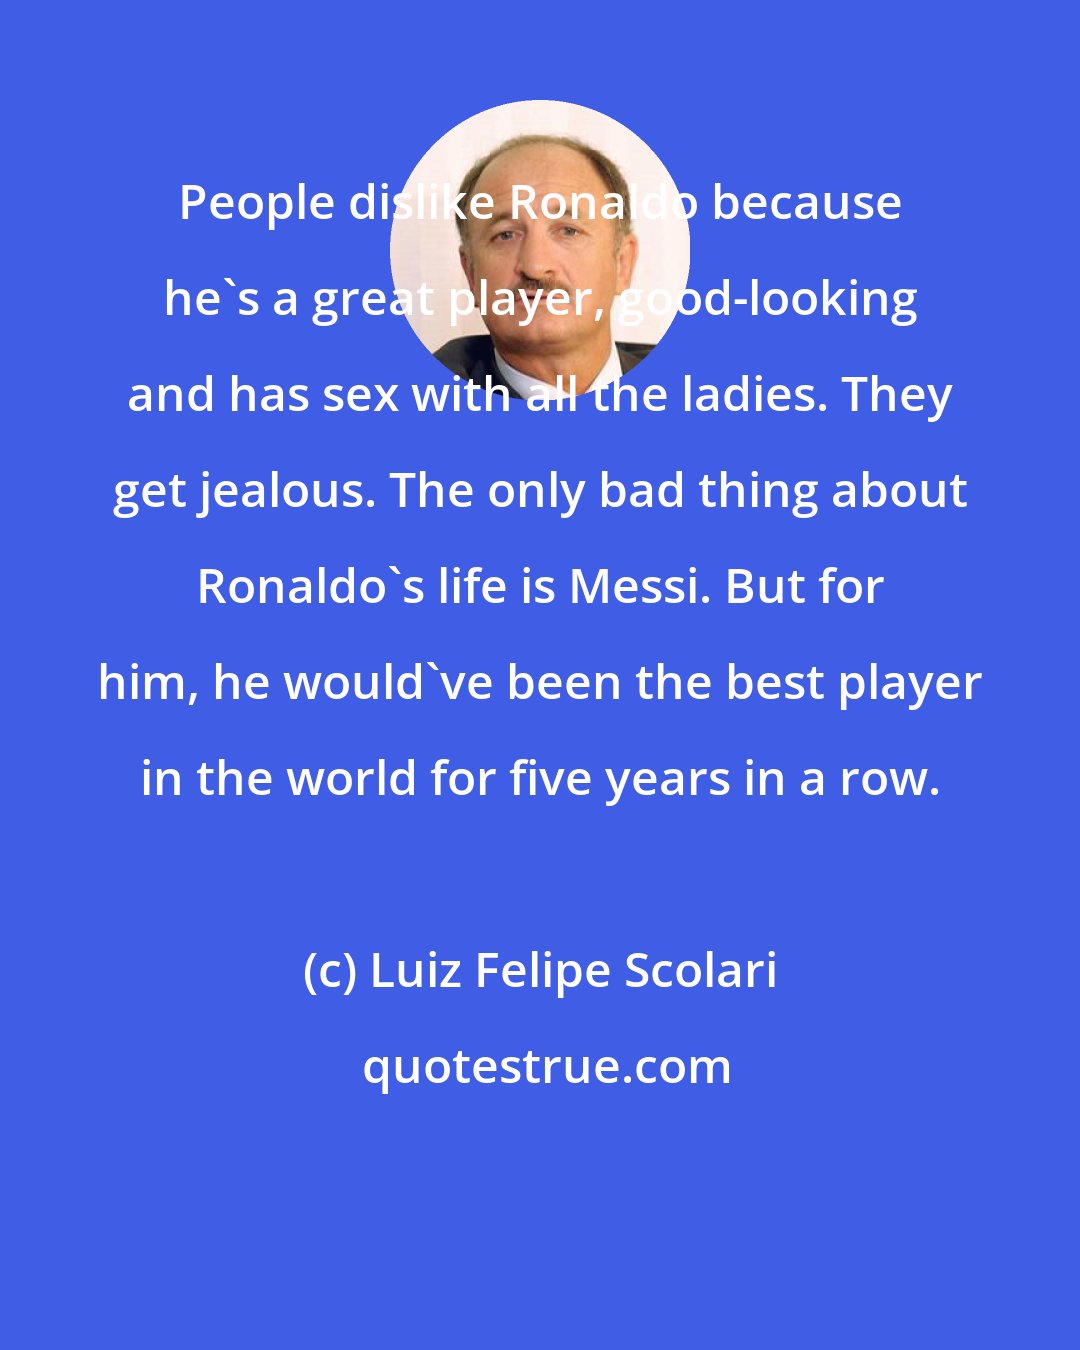 Luiz Felipe Scolari: People dislike Ronaldo because he's a great player, good-looking and has sex with all the ladies. They get jealous. The only bad thing about Ronaldo's life is Messi. But for him, he would've been the best player in the world for five years in a row.